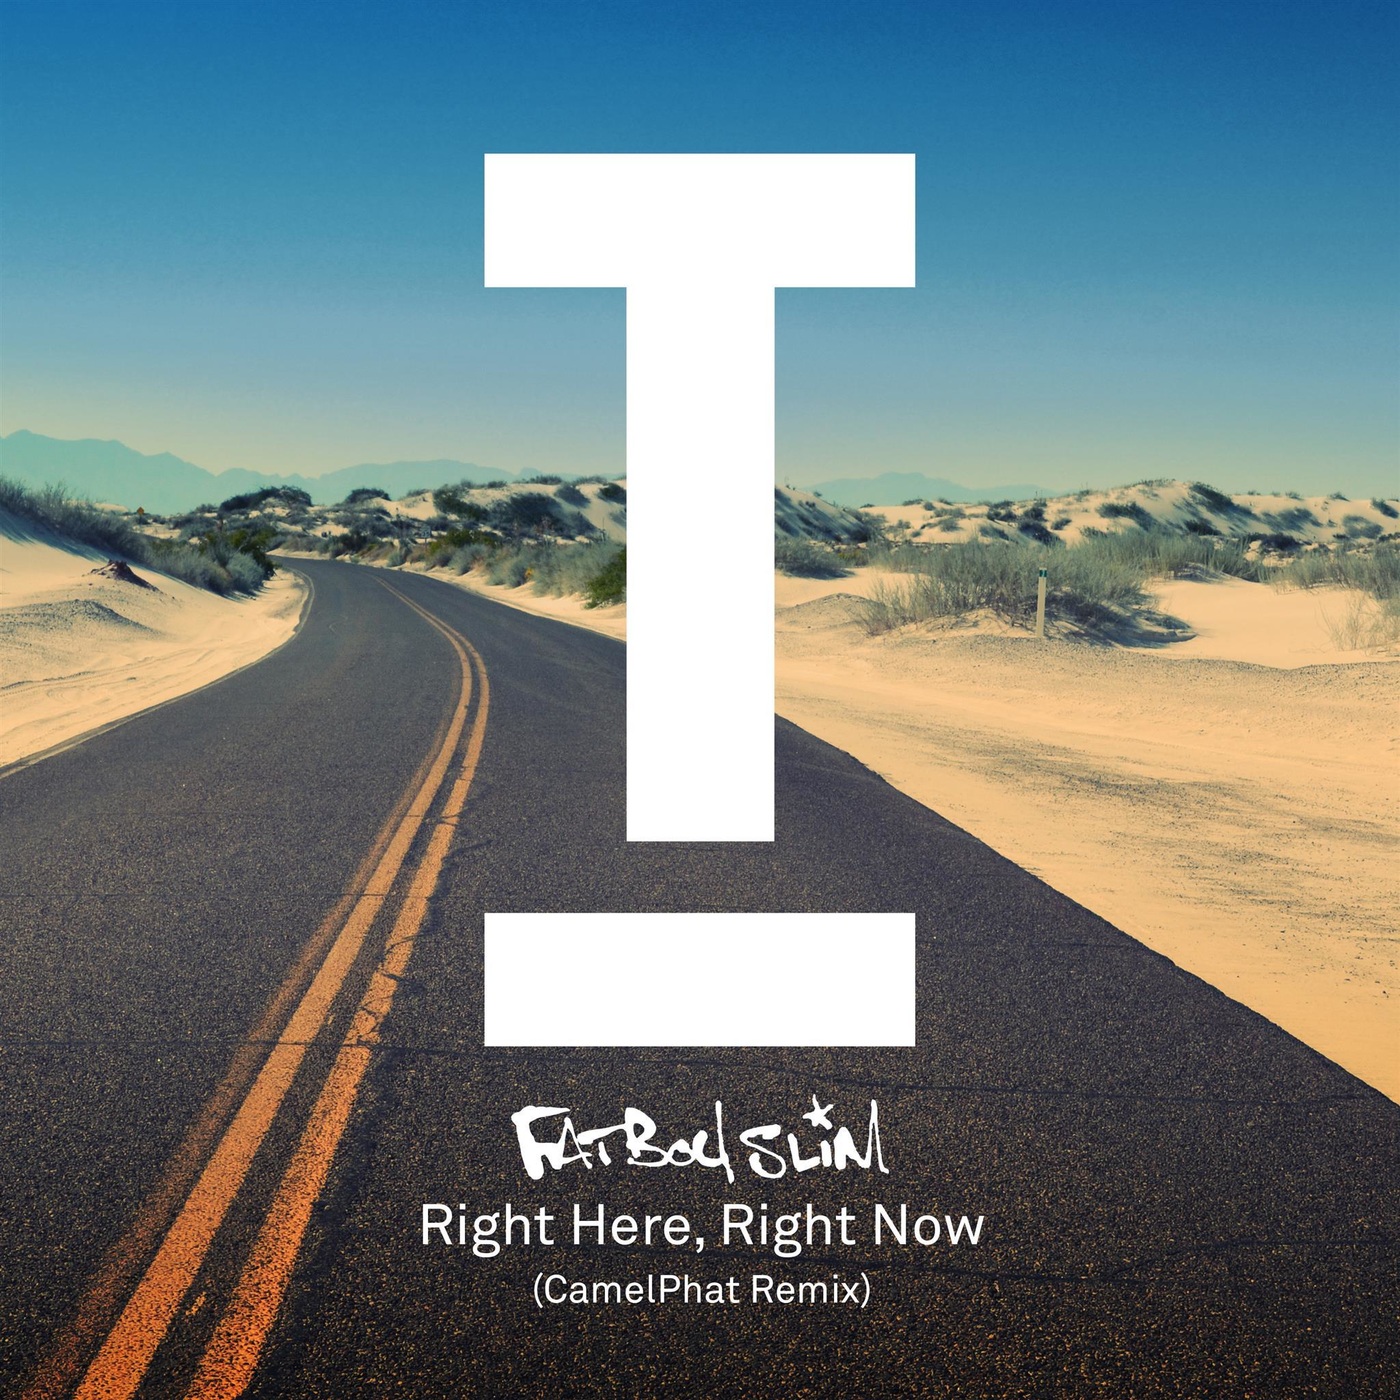 Fatboy Slim - Right Here, Right Now (CamelPhat Remix) / Toolroom